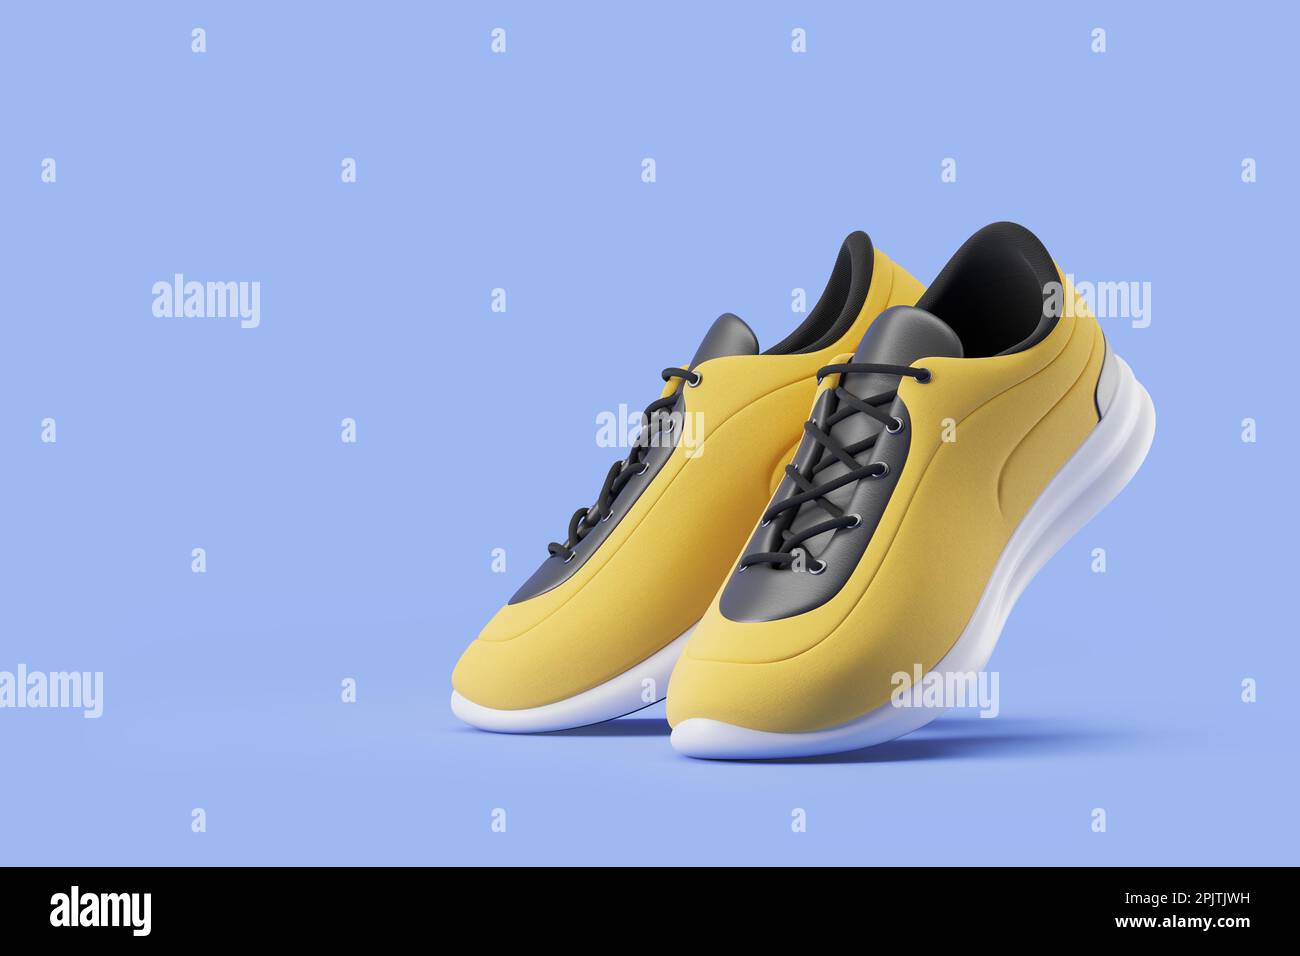 Bright and stylish yellow and black sport shoes with black shoelaces over light blue background. Concept of sport and active lifestyle. 3d rendering, Stock Photo